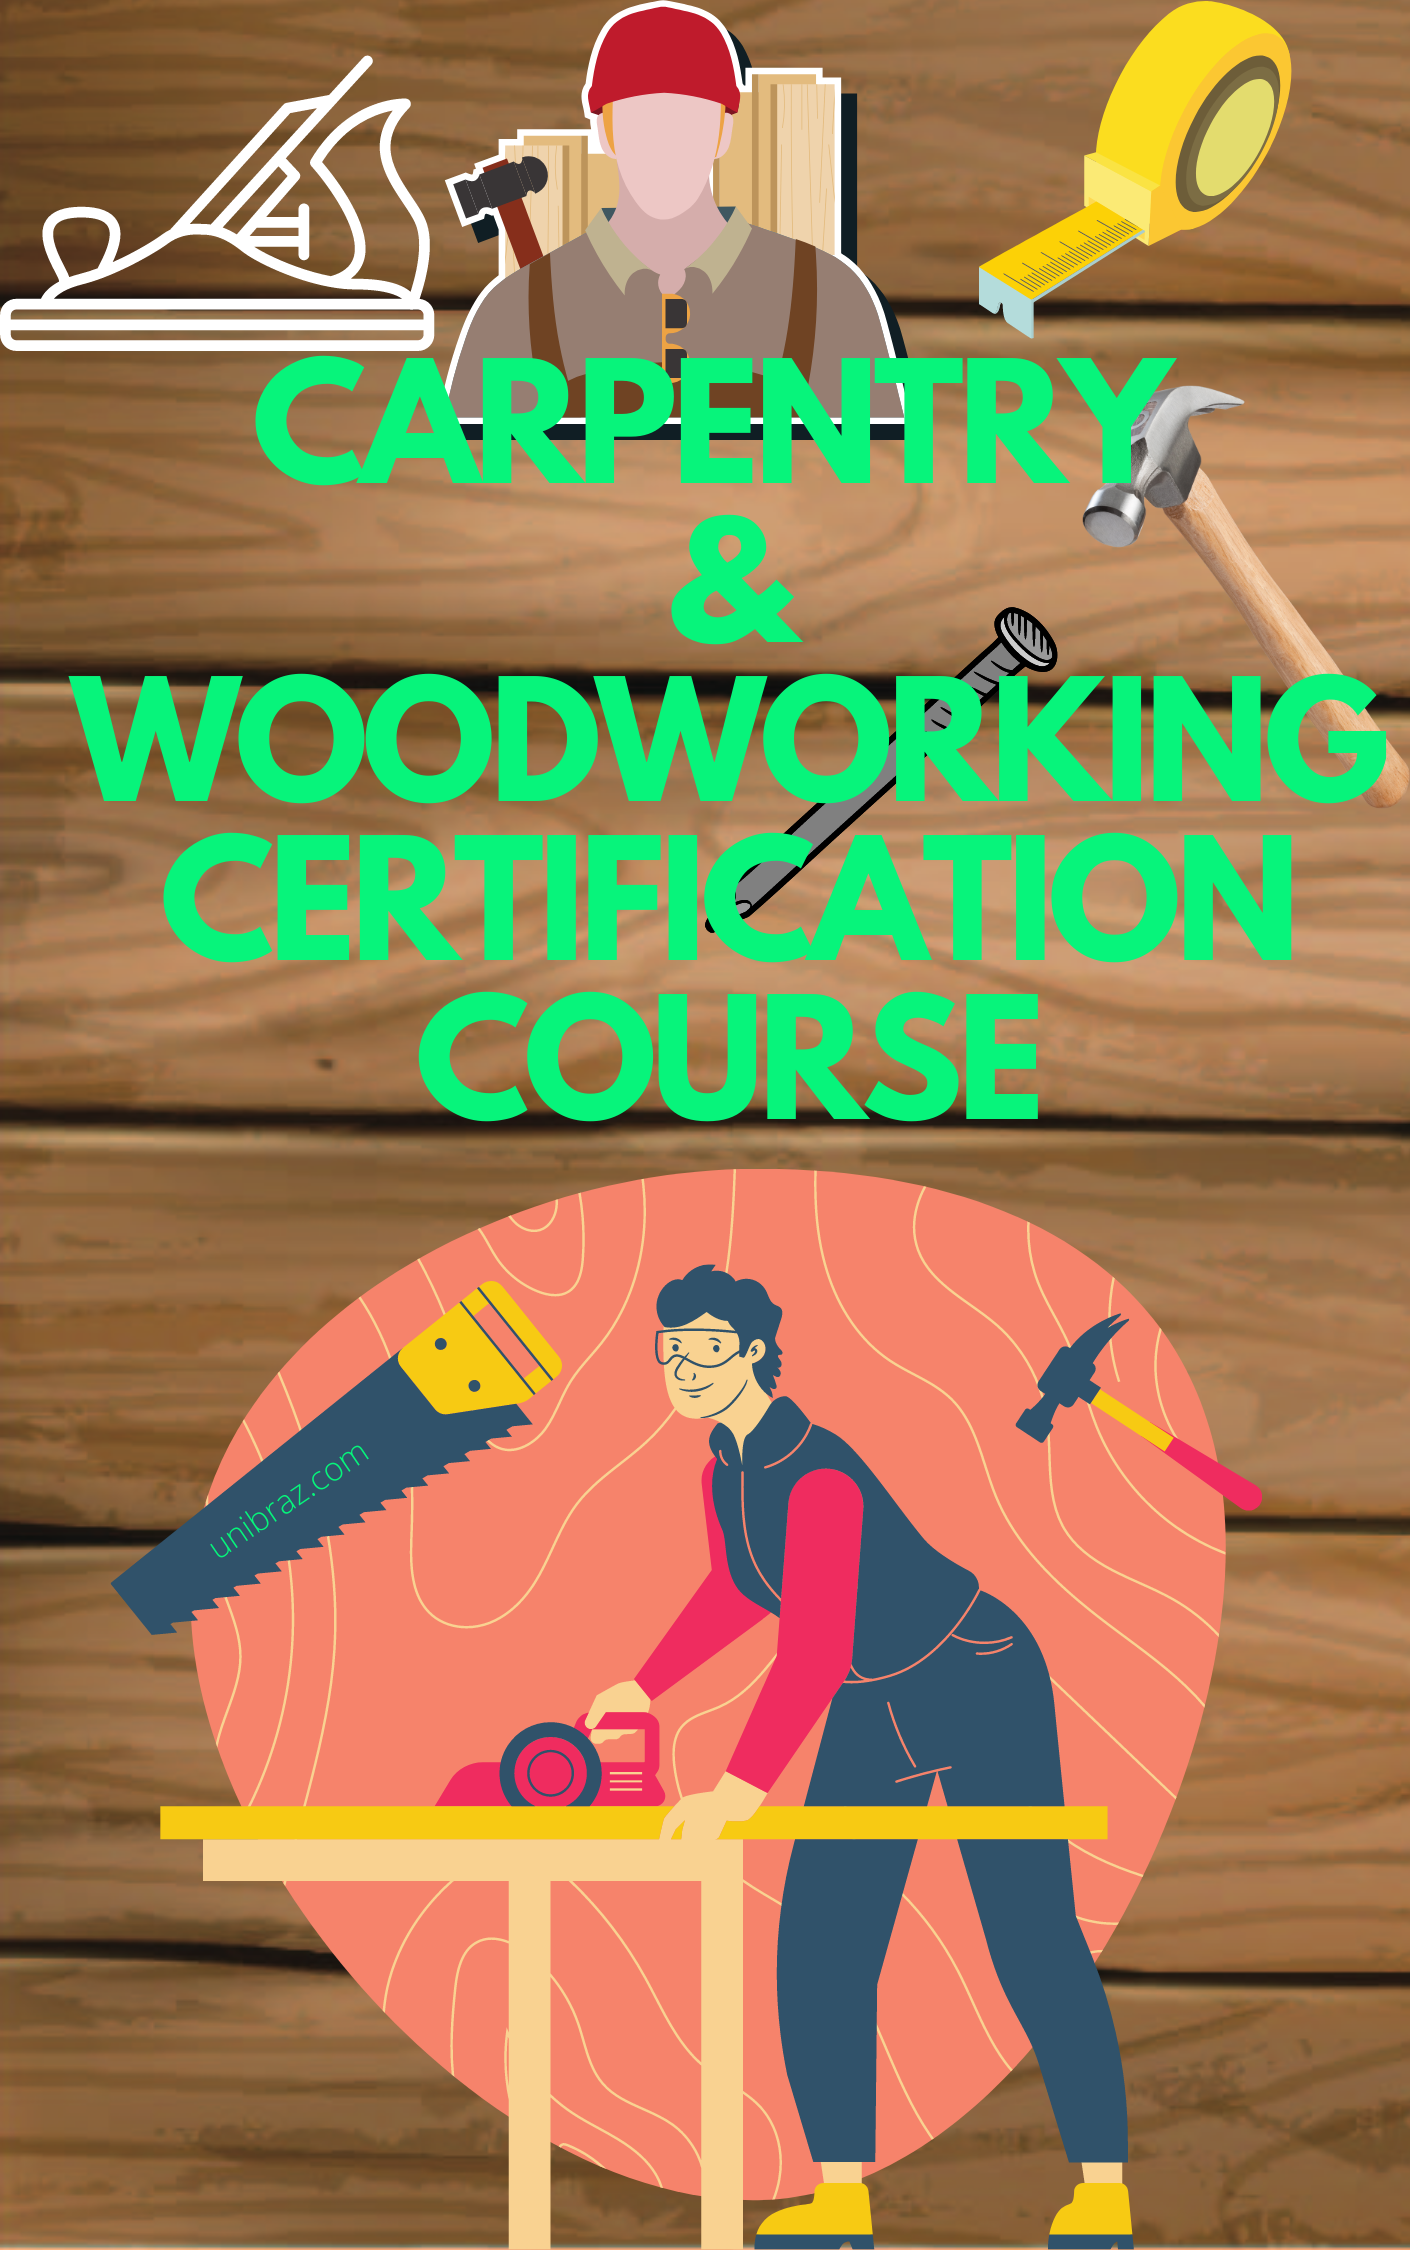 CARPENTRY AND WOODWORKING TRADE CERTIFICATION COURSE